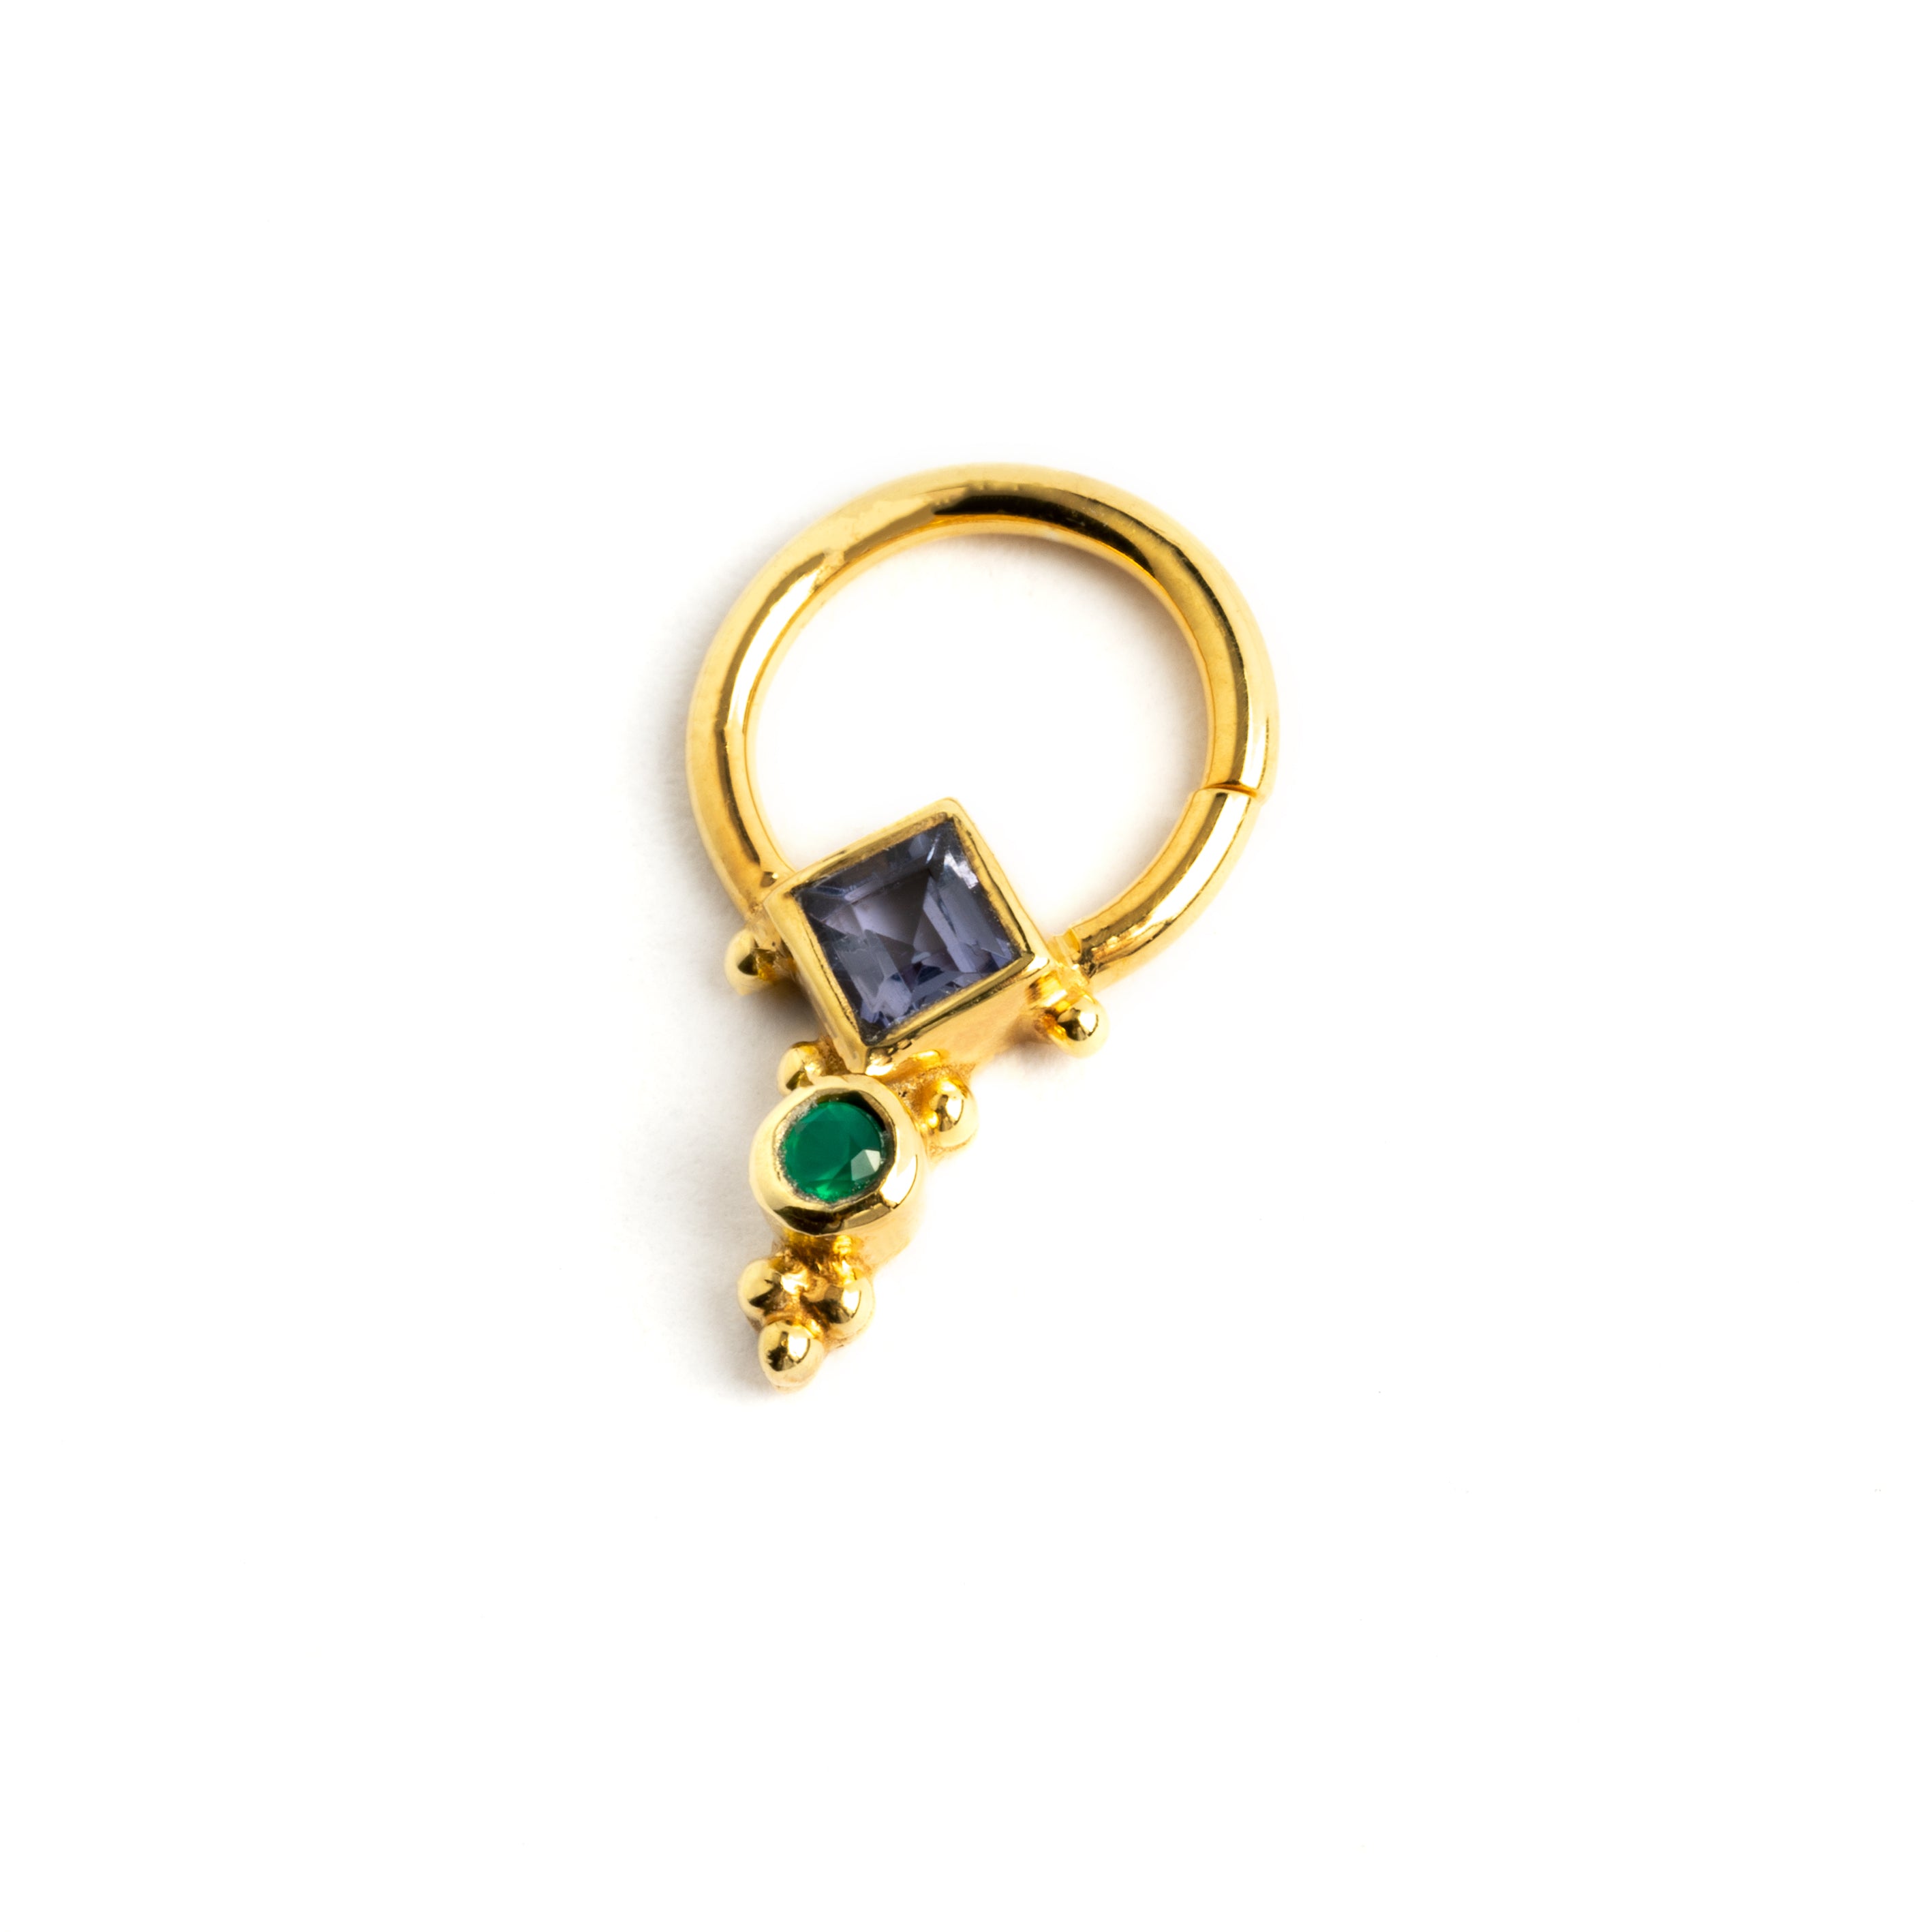 Rishi Gold Septum - Lolite and Green Onyx left side view